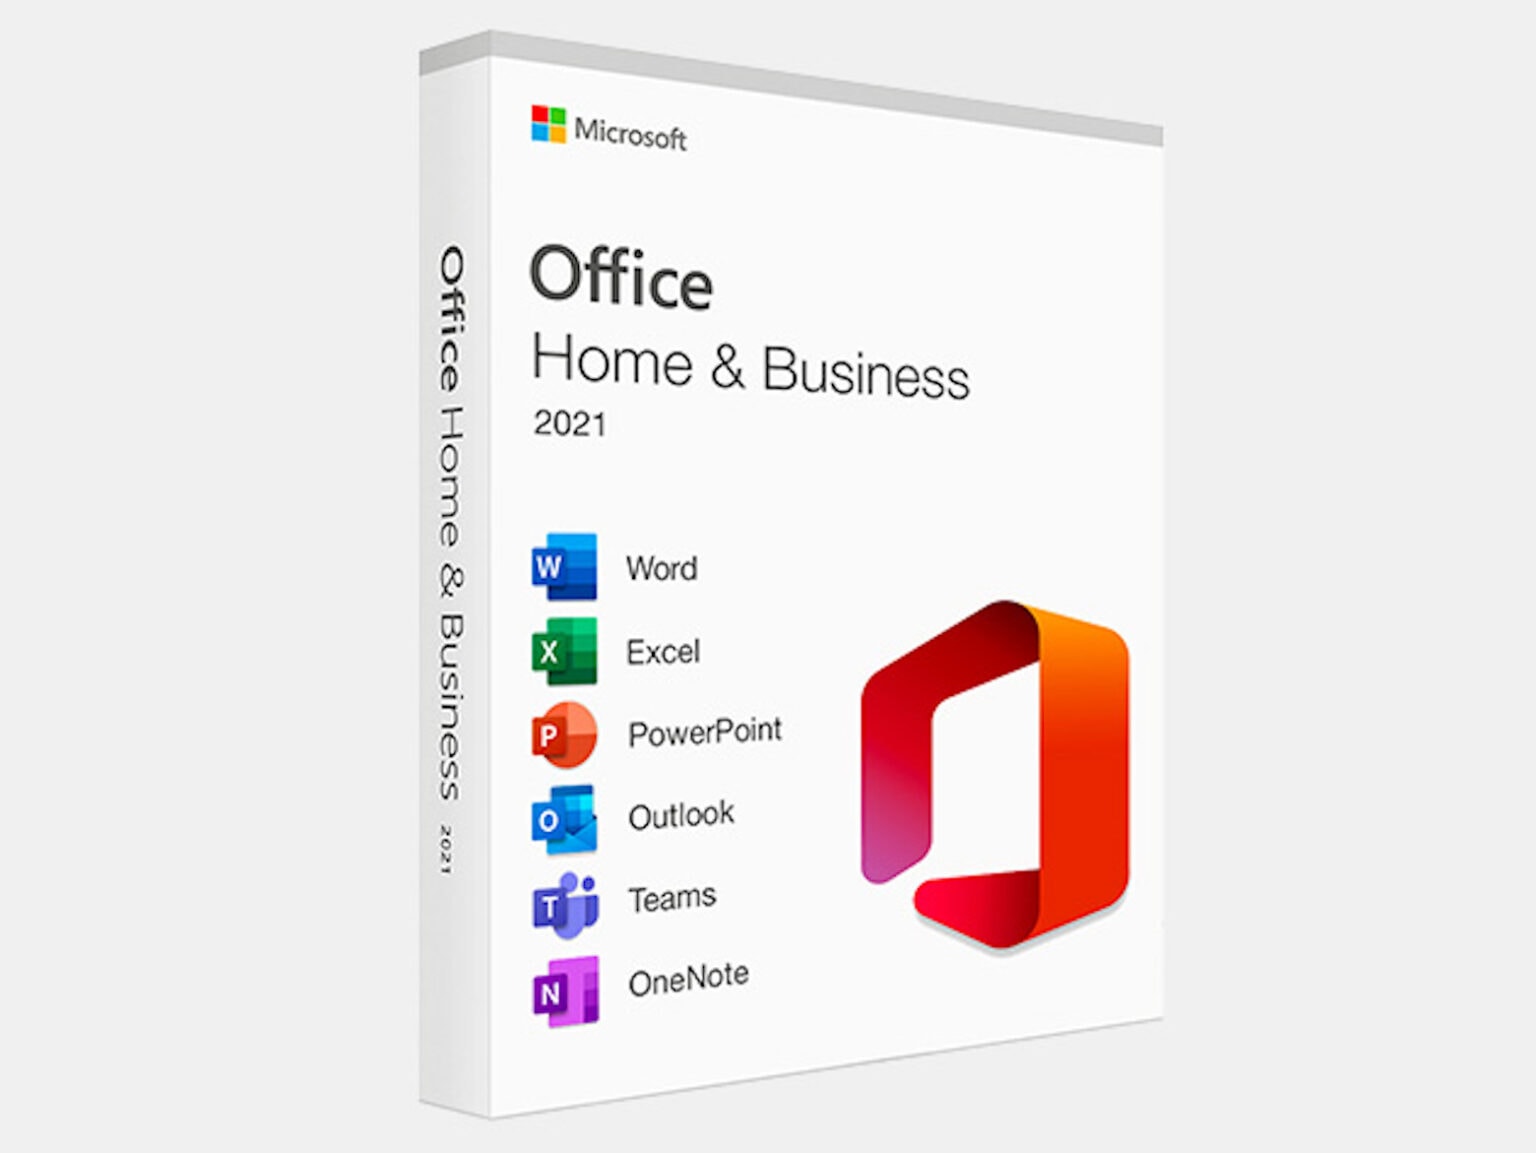 Get 85% off the full Microsoft Office suite for Mac today.